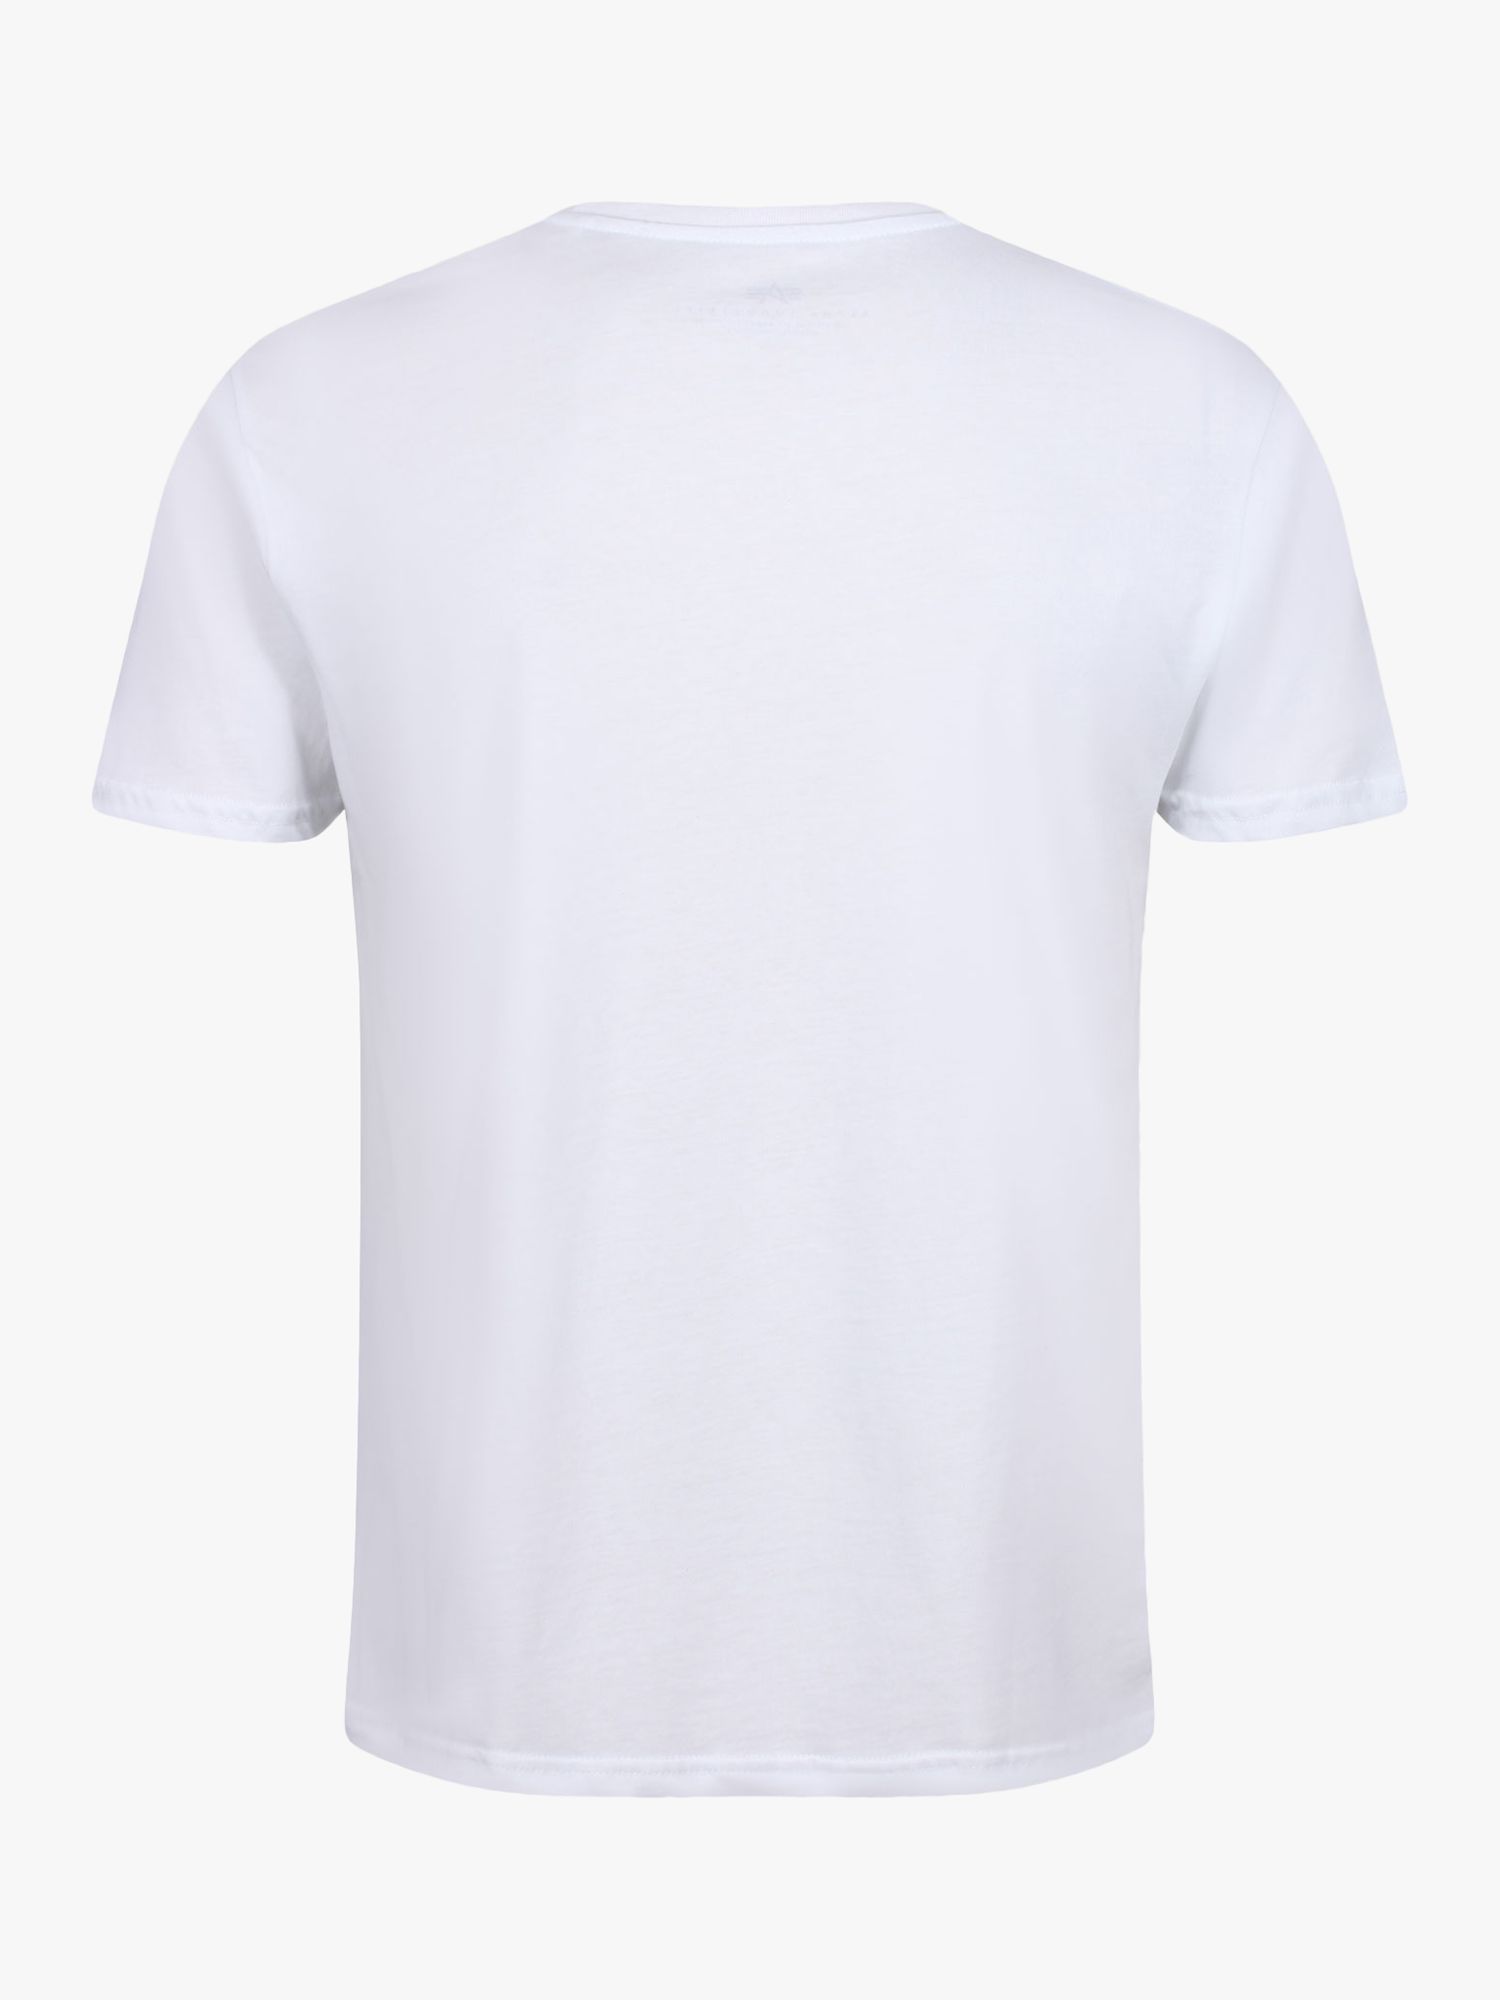 Alpha Industries Crew T-Shirt, Pack of 2, White, XS